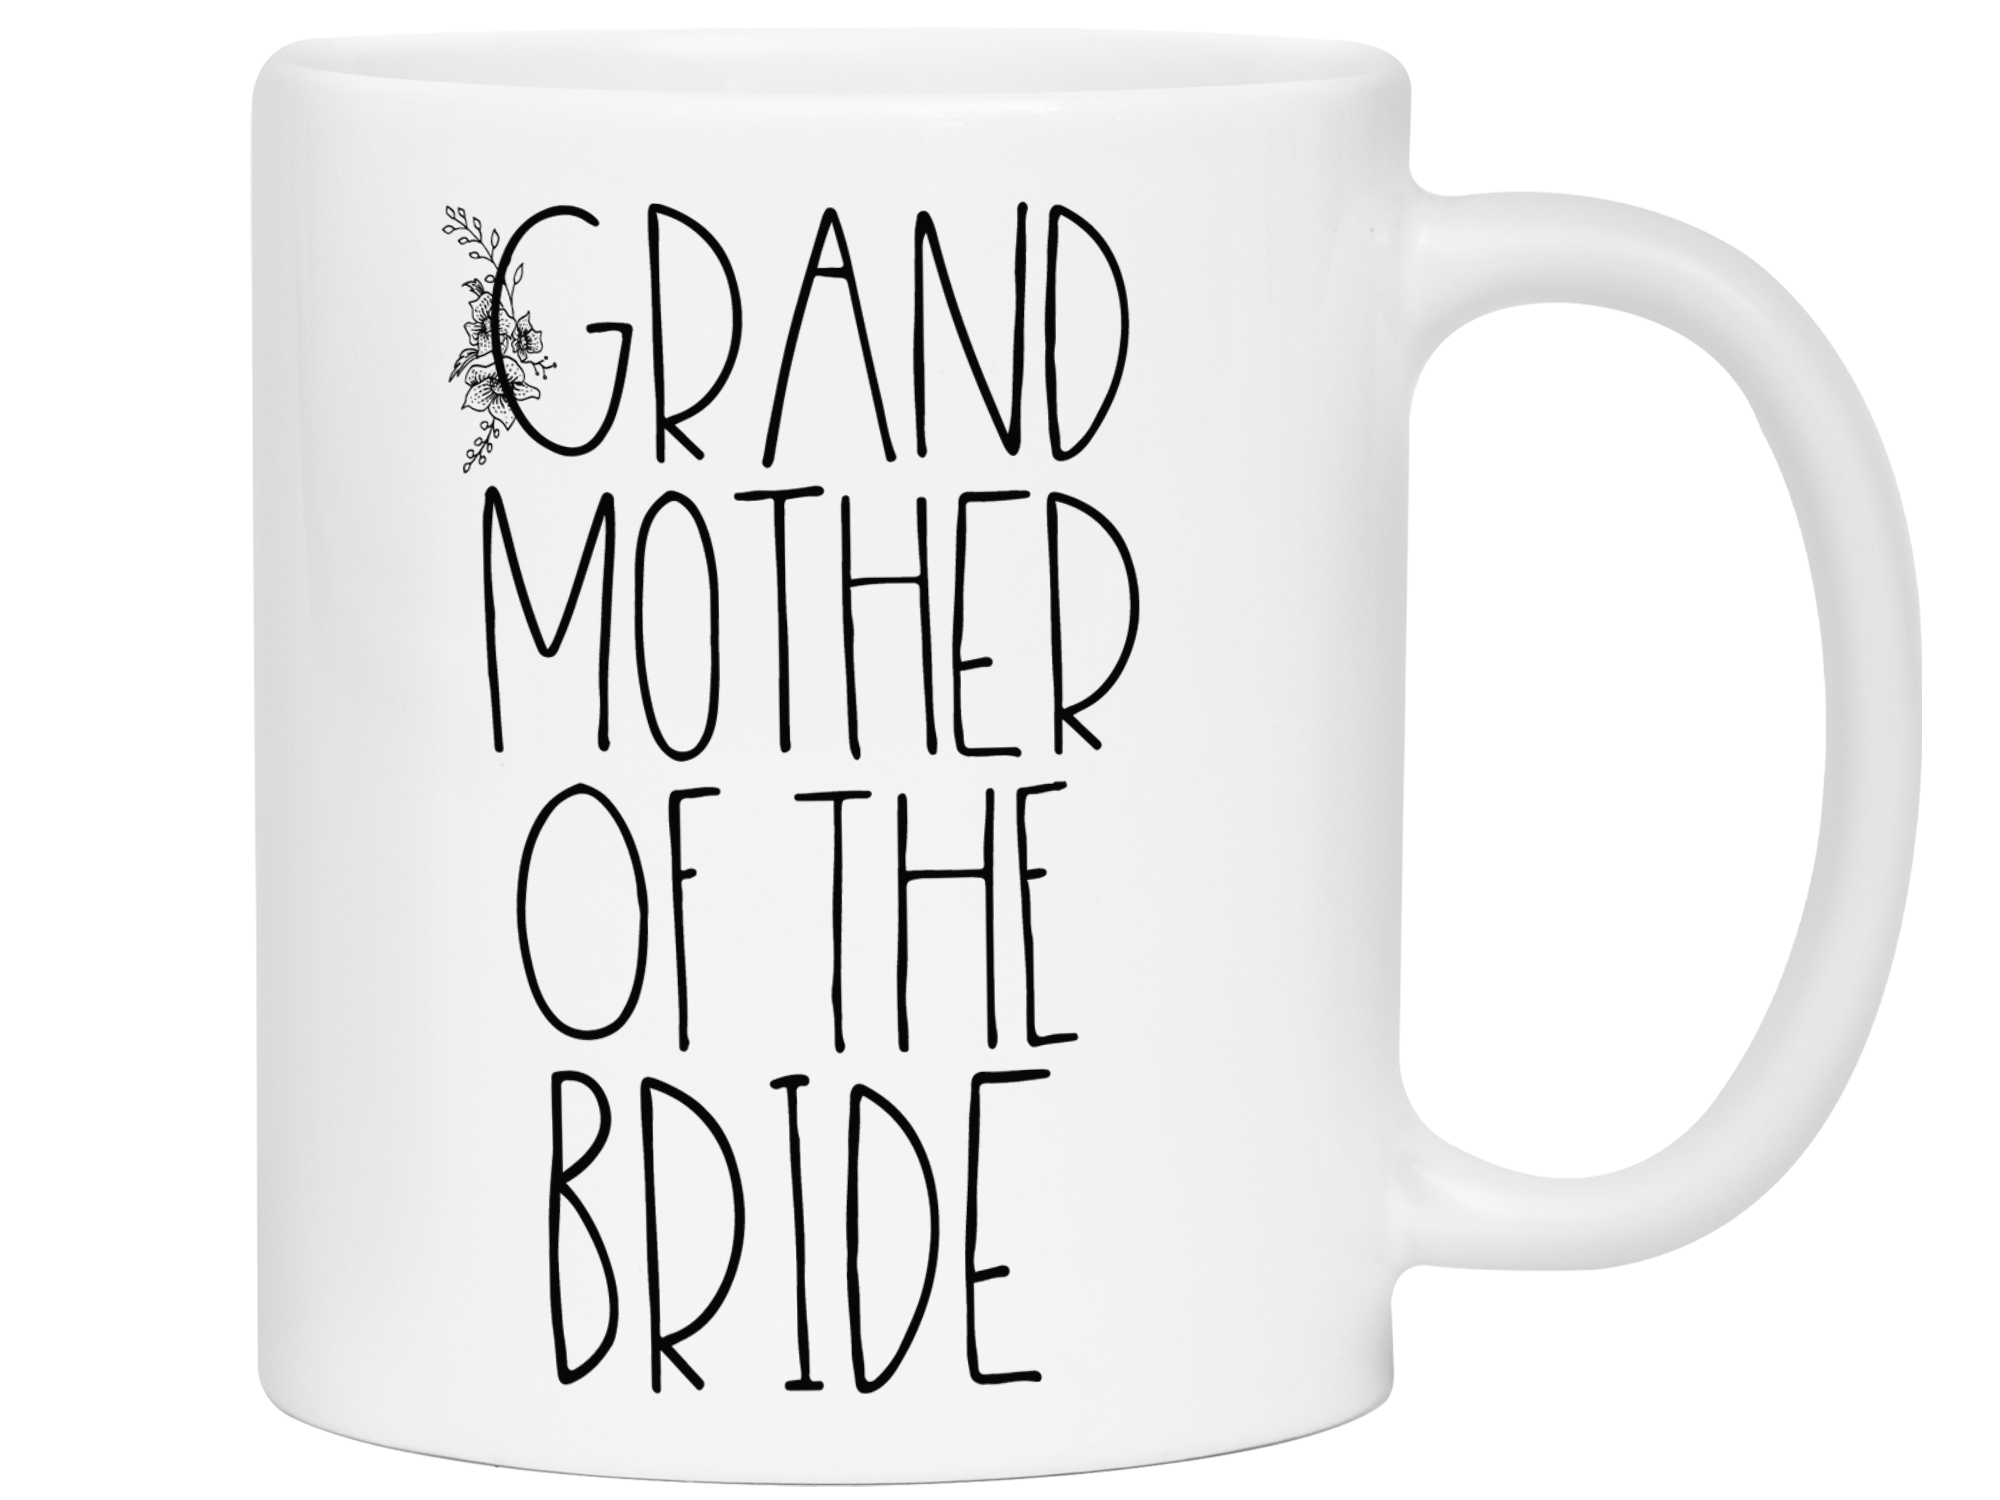 Gifts for a Grandmother of the Bride - Grandmother of the Bride Coffee Mug